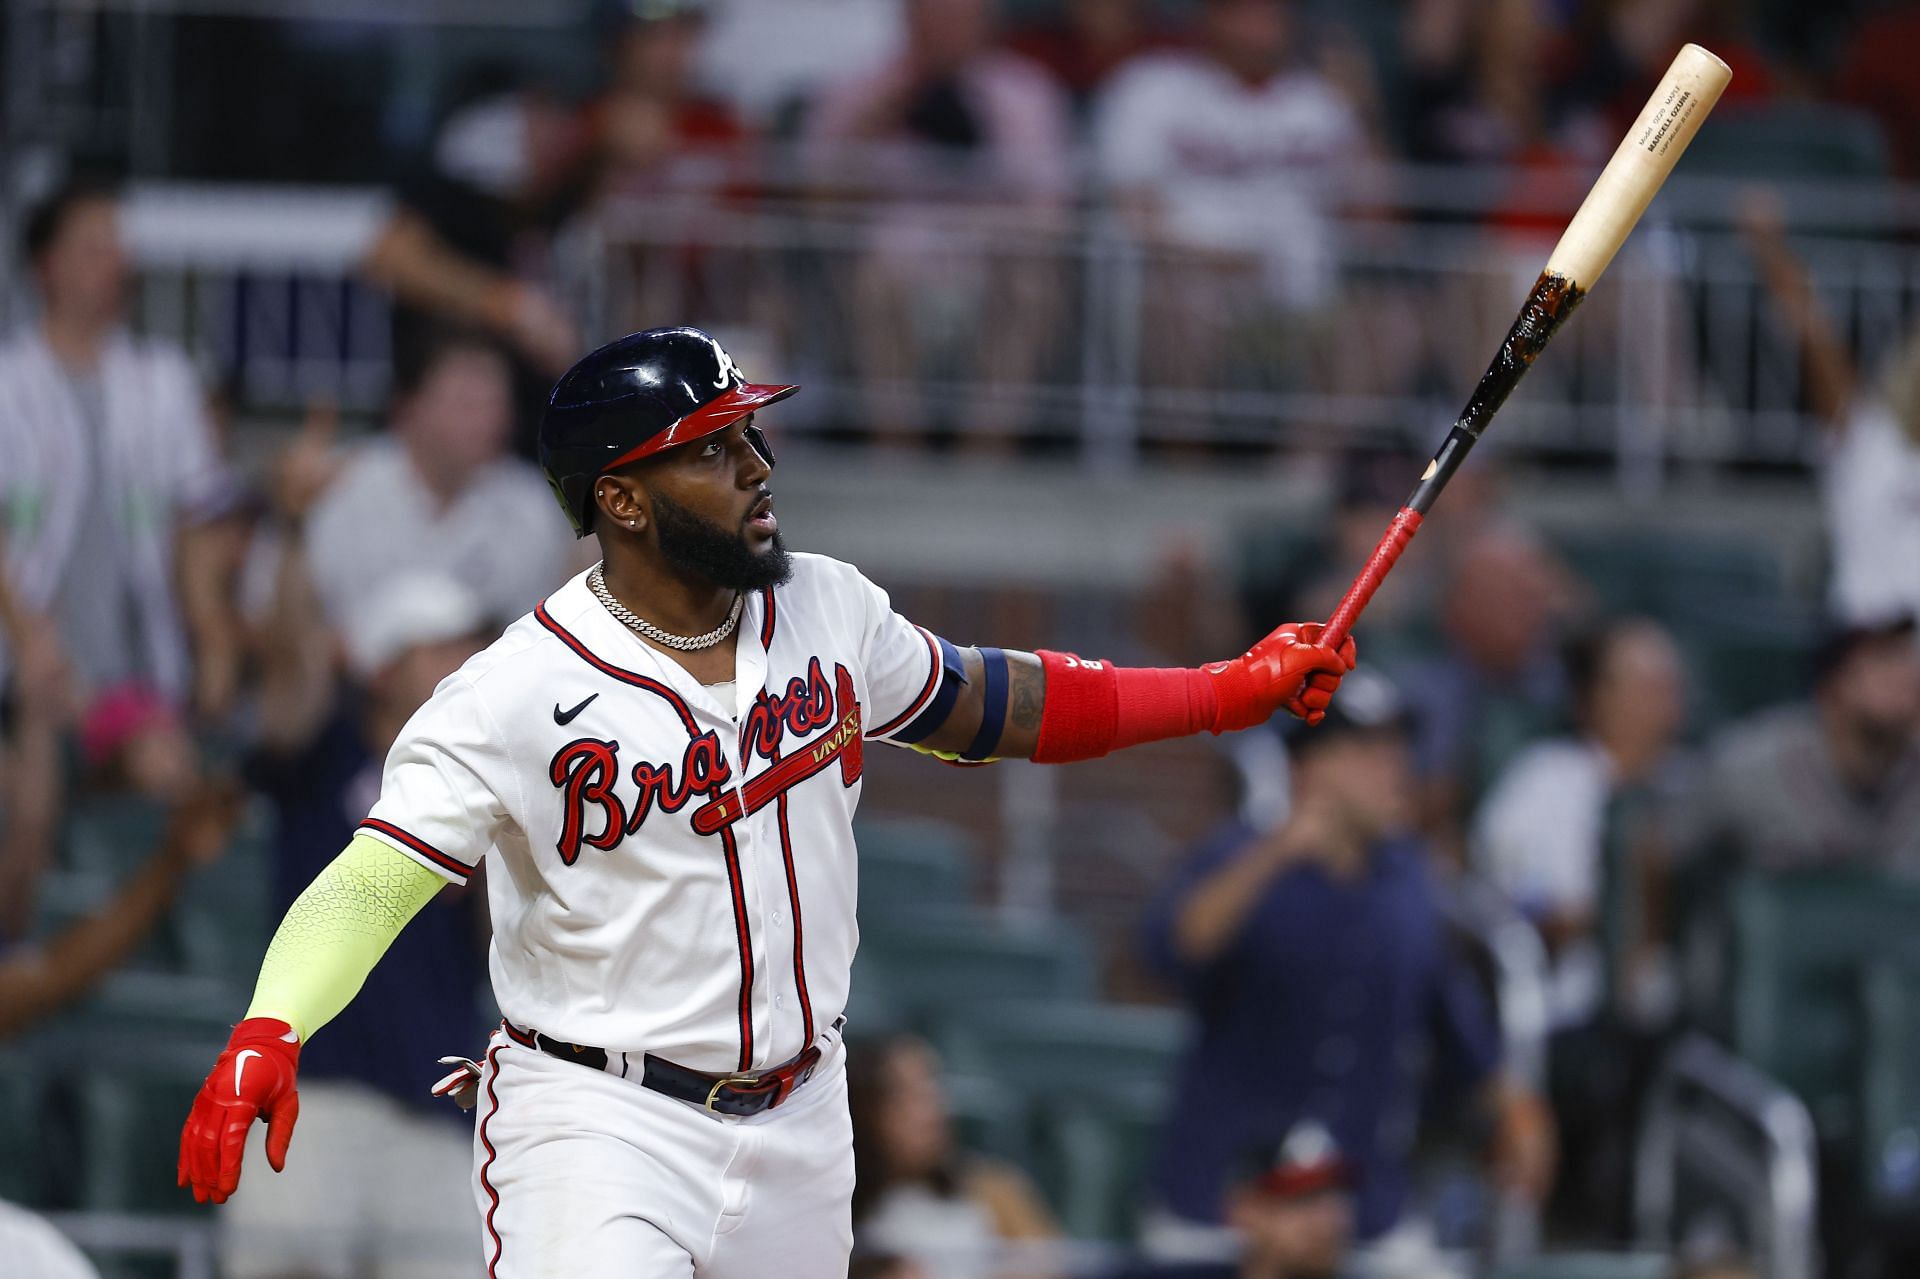 Braves Briefing: Marcell Ozuna is on fire